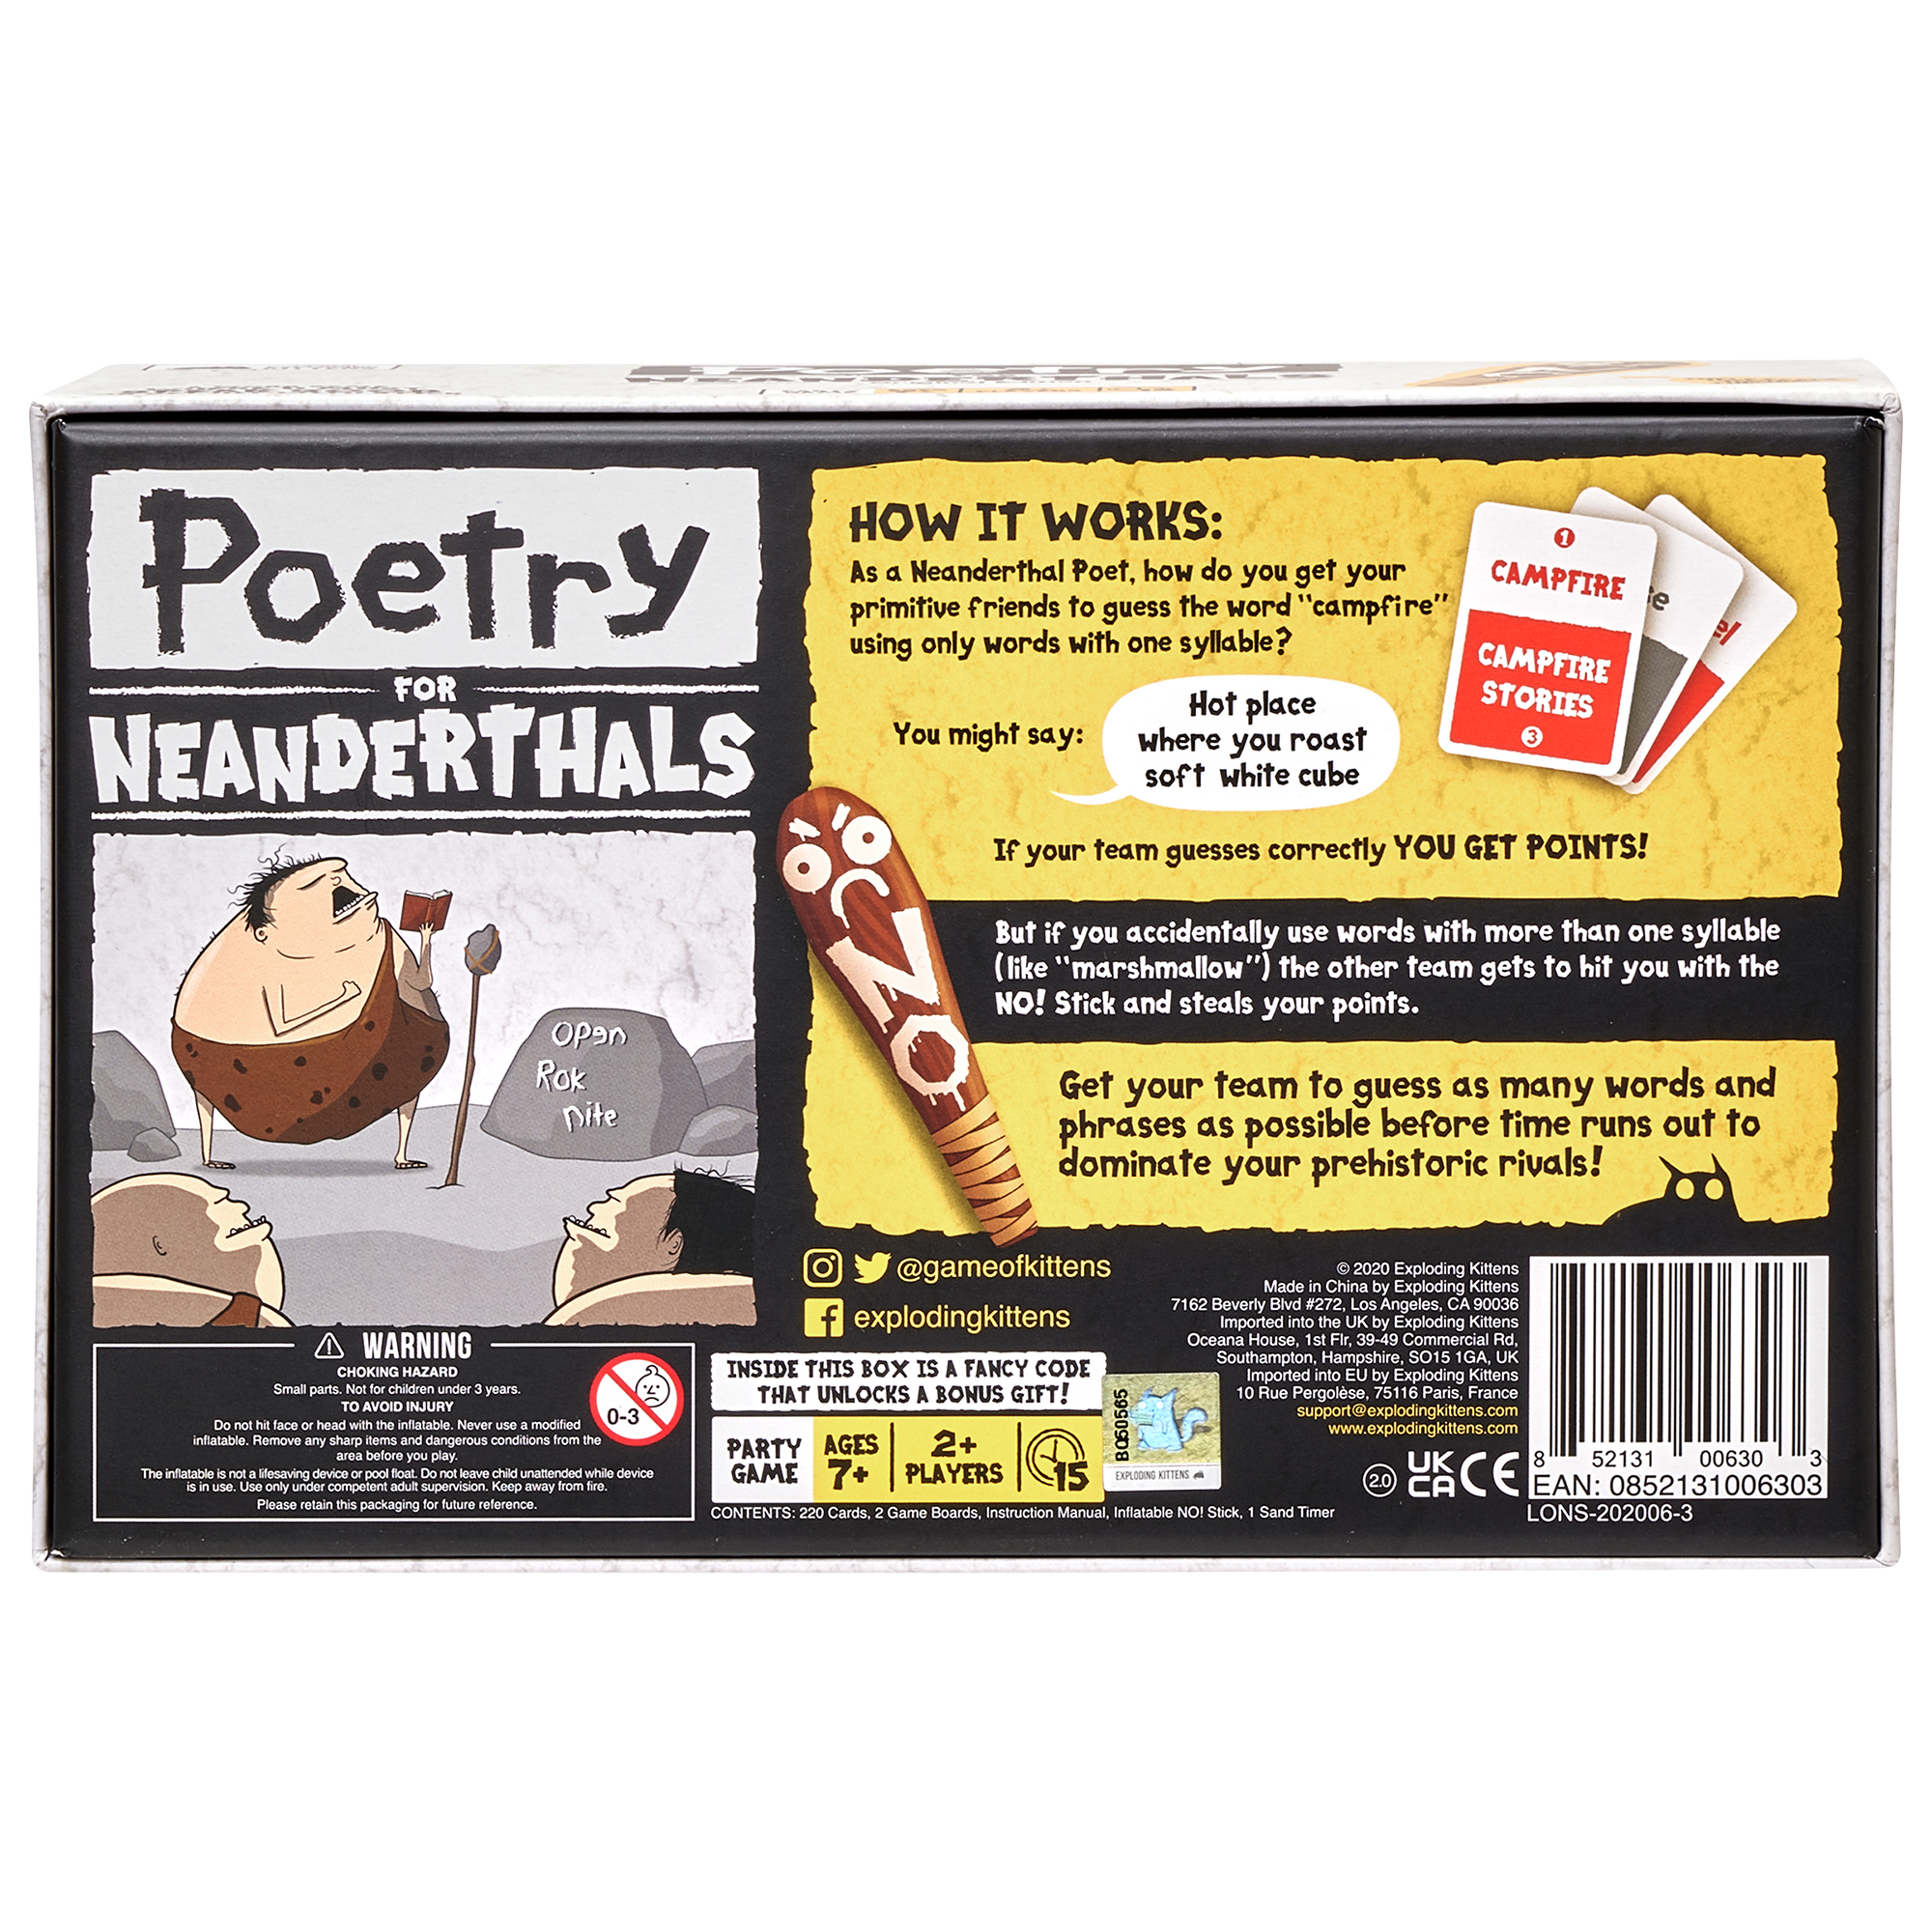 Poetry for Neanderthals Party Game by Exploding Kittens, 15 Minutes, Ages 7 and up, 2+ Players. - image 5 of 5